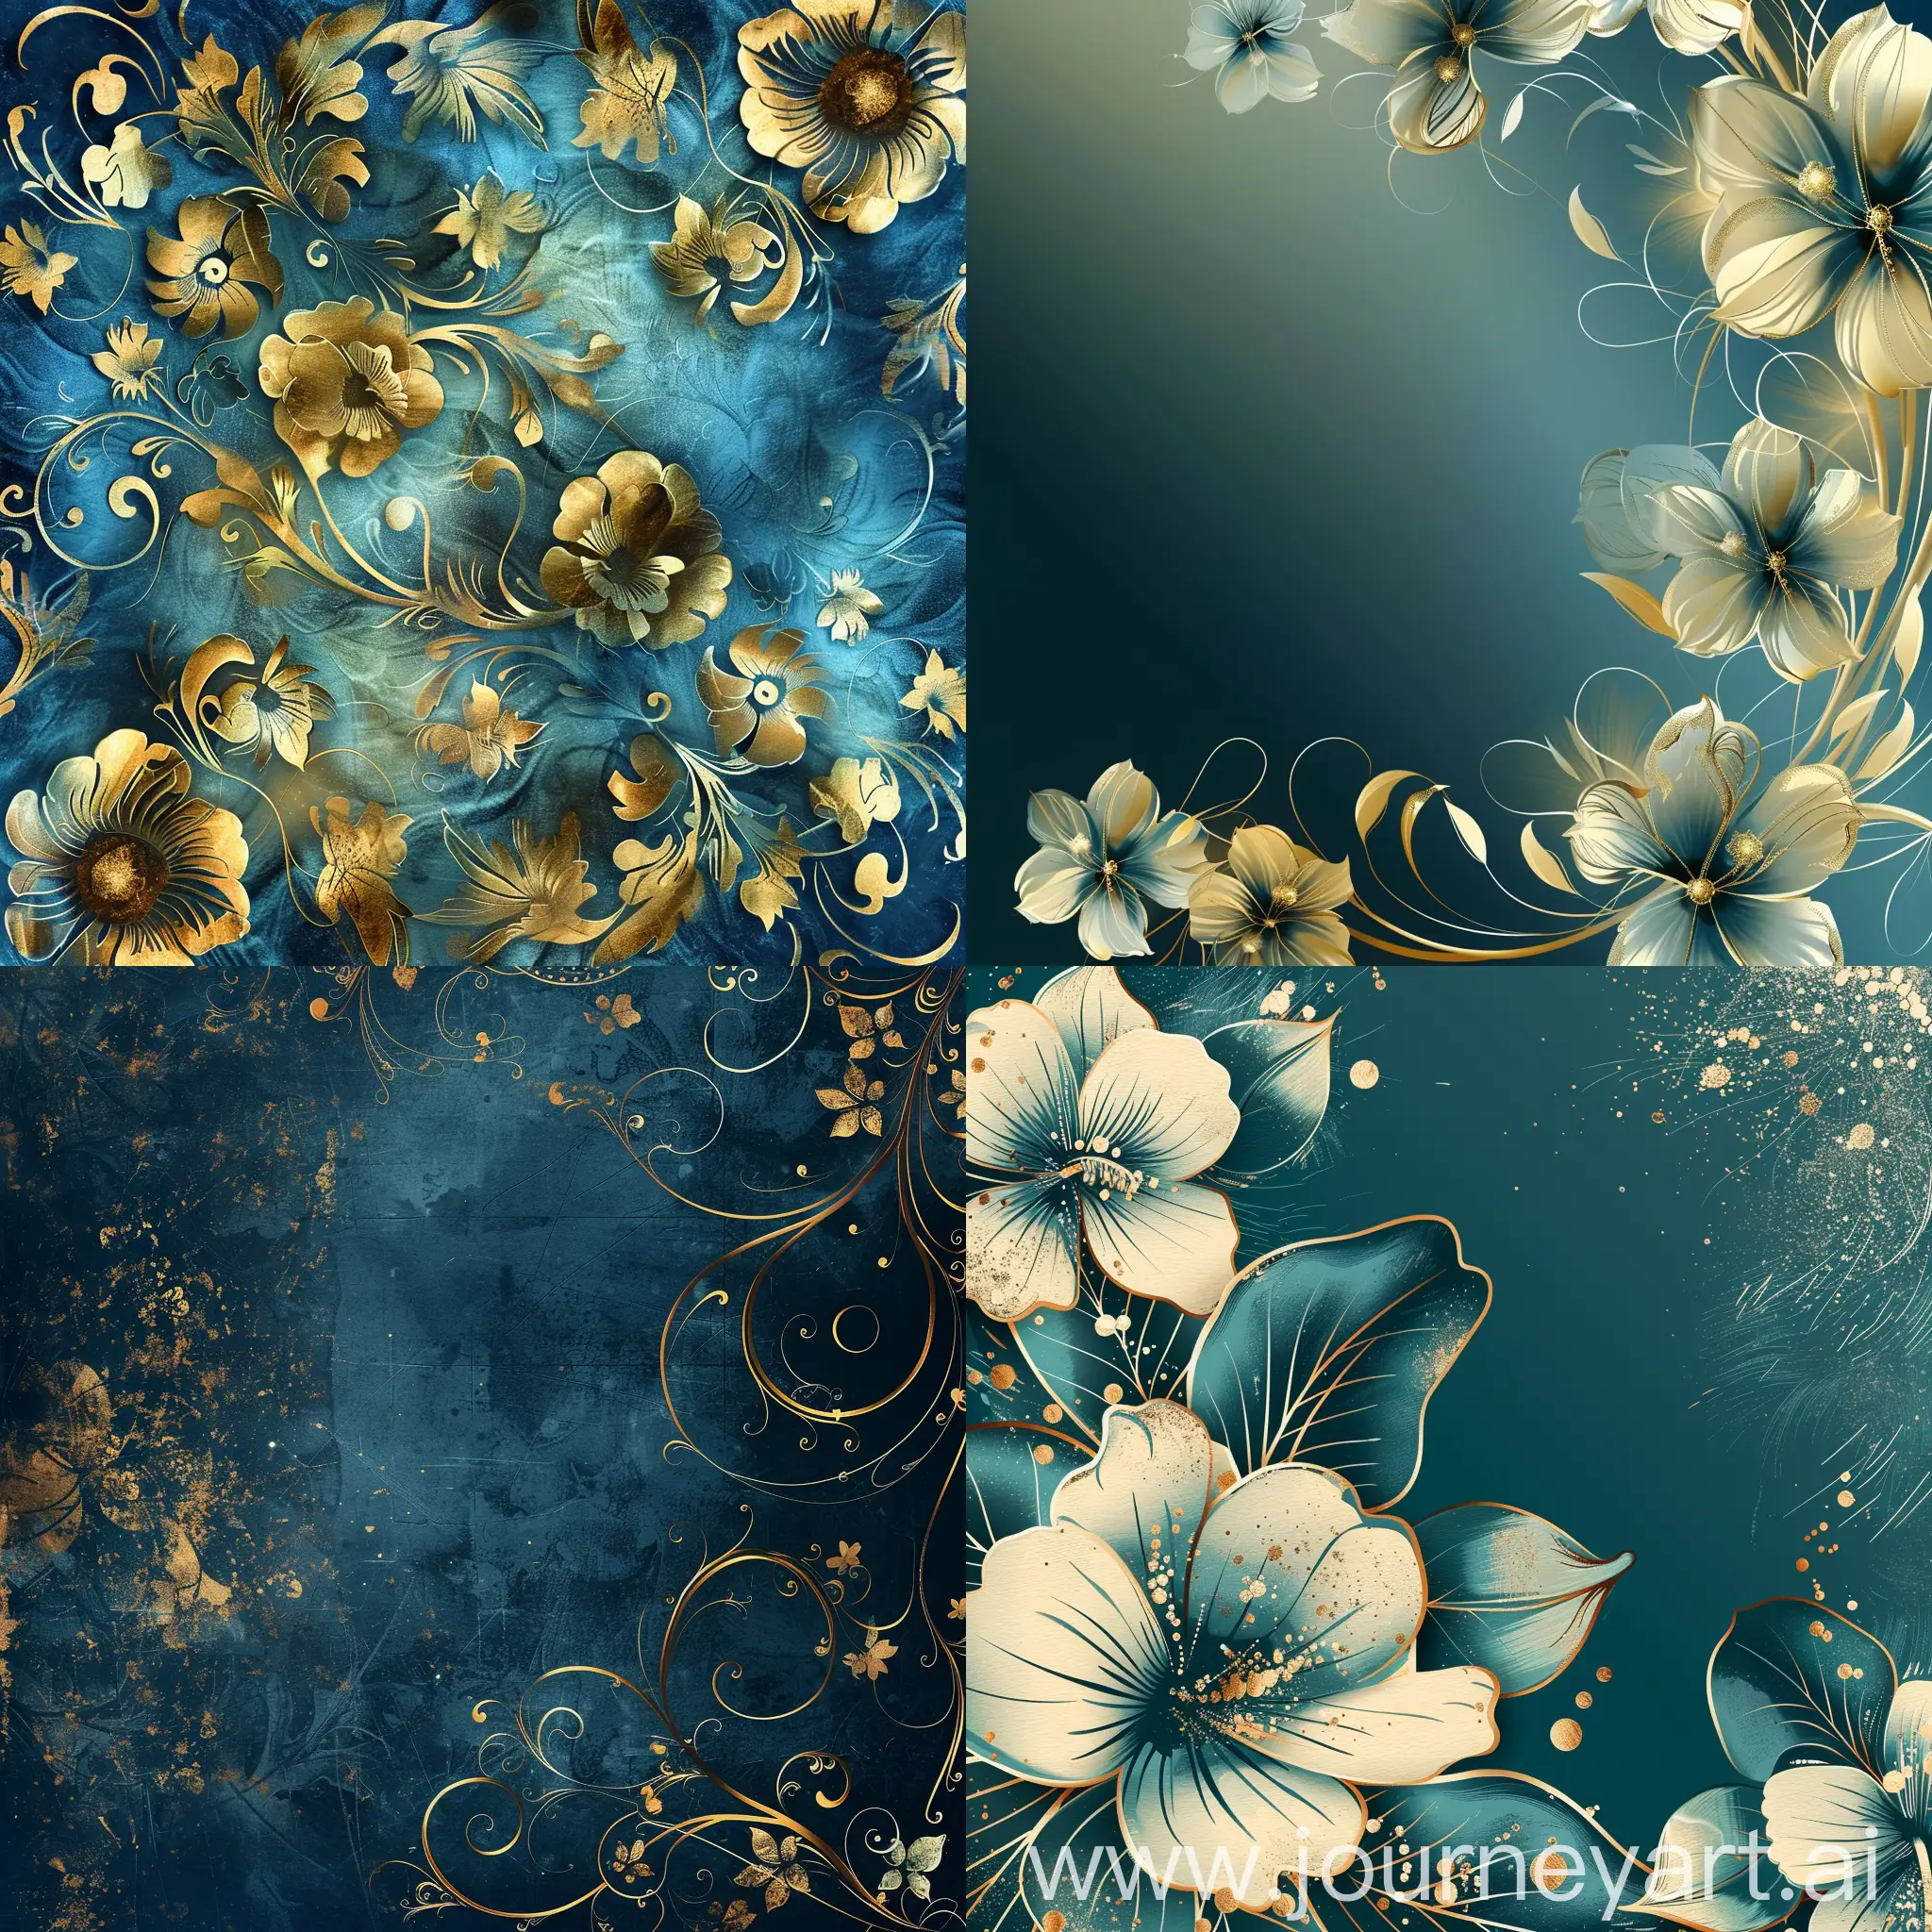 Floral, background, printable, beautiful, fantasy, blue and gold.
